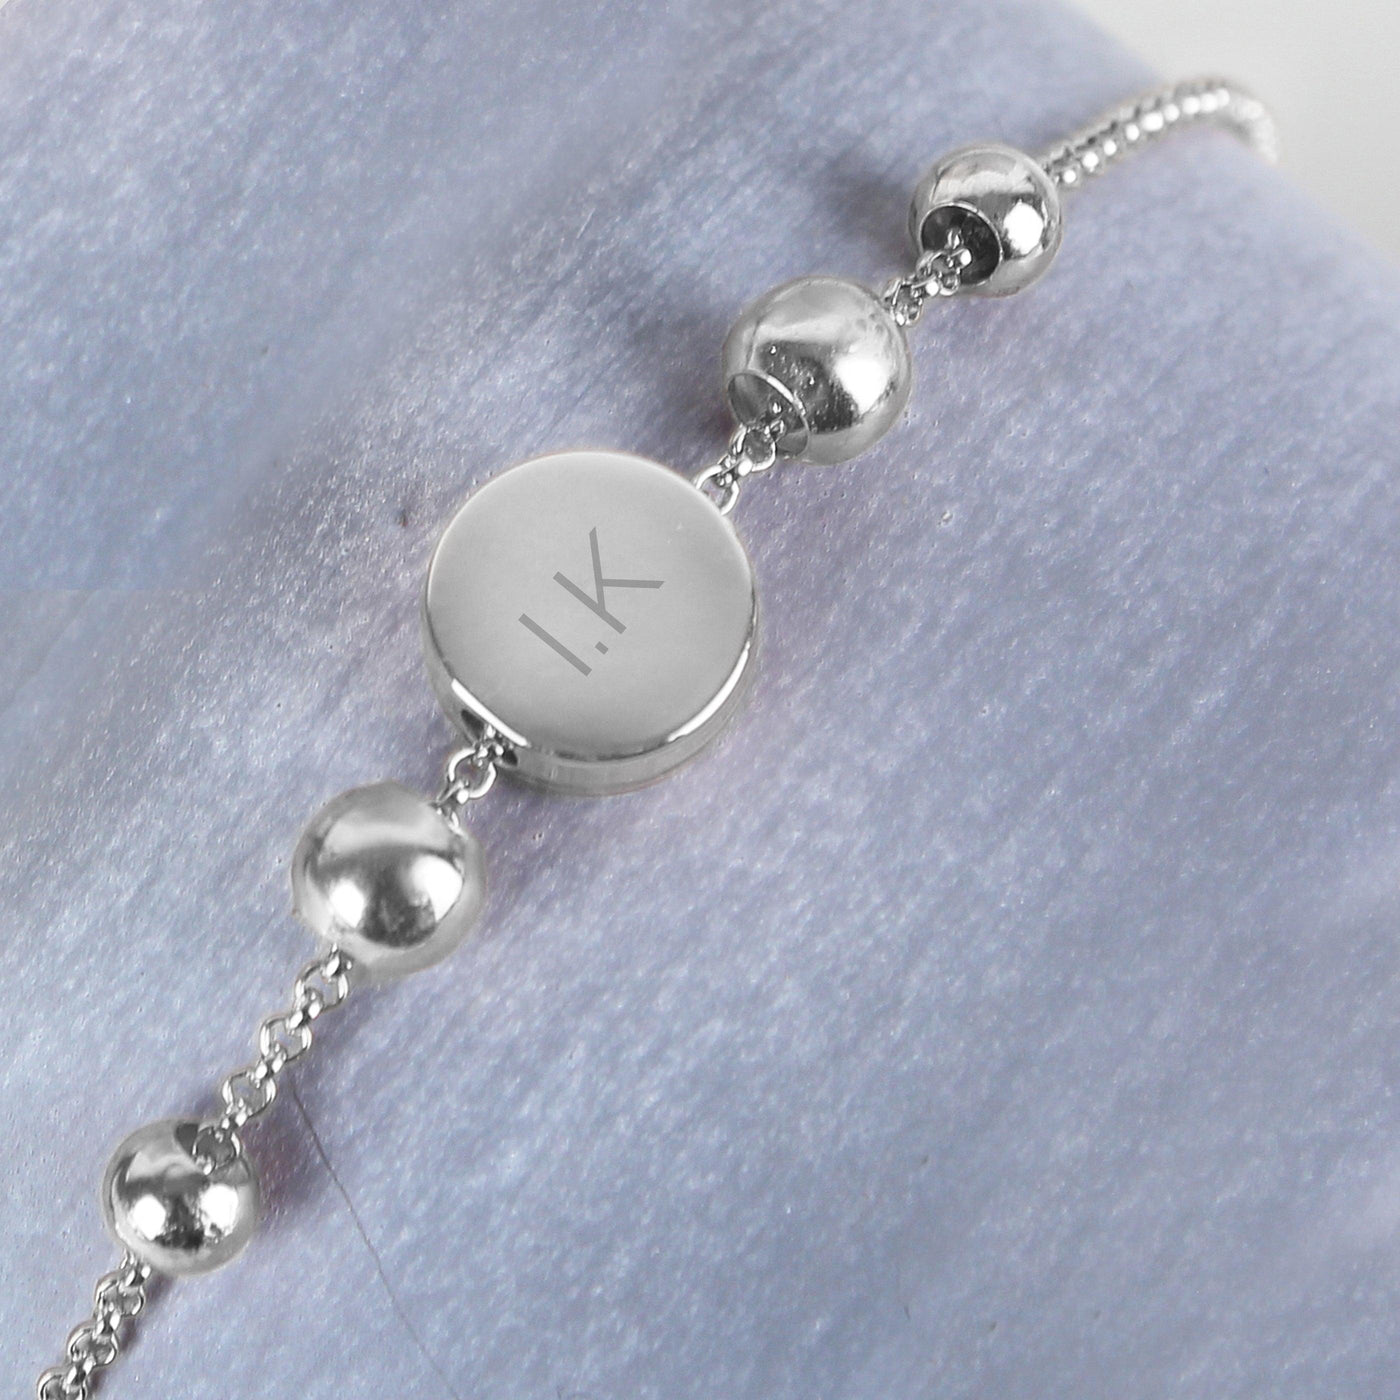 Personalised Silver Plated Initials Disc Bracelet - Shop Personalised Gifts